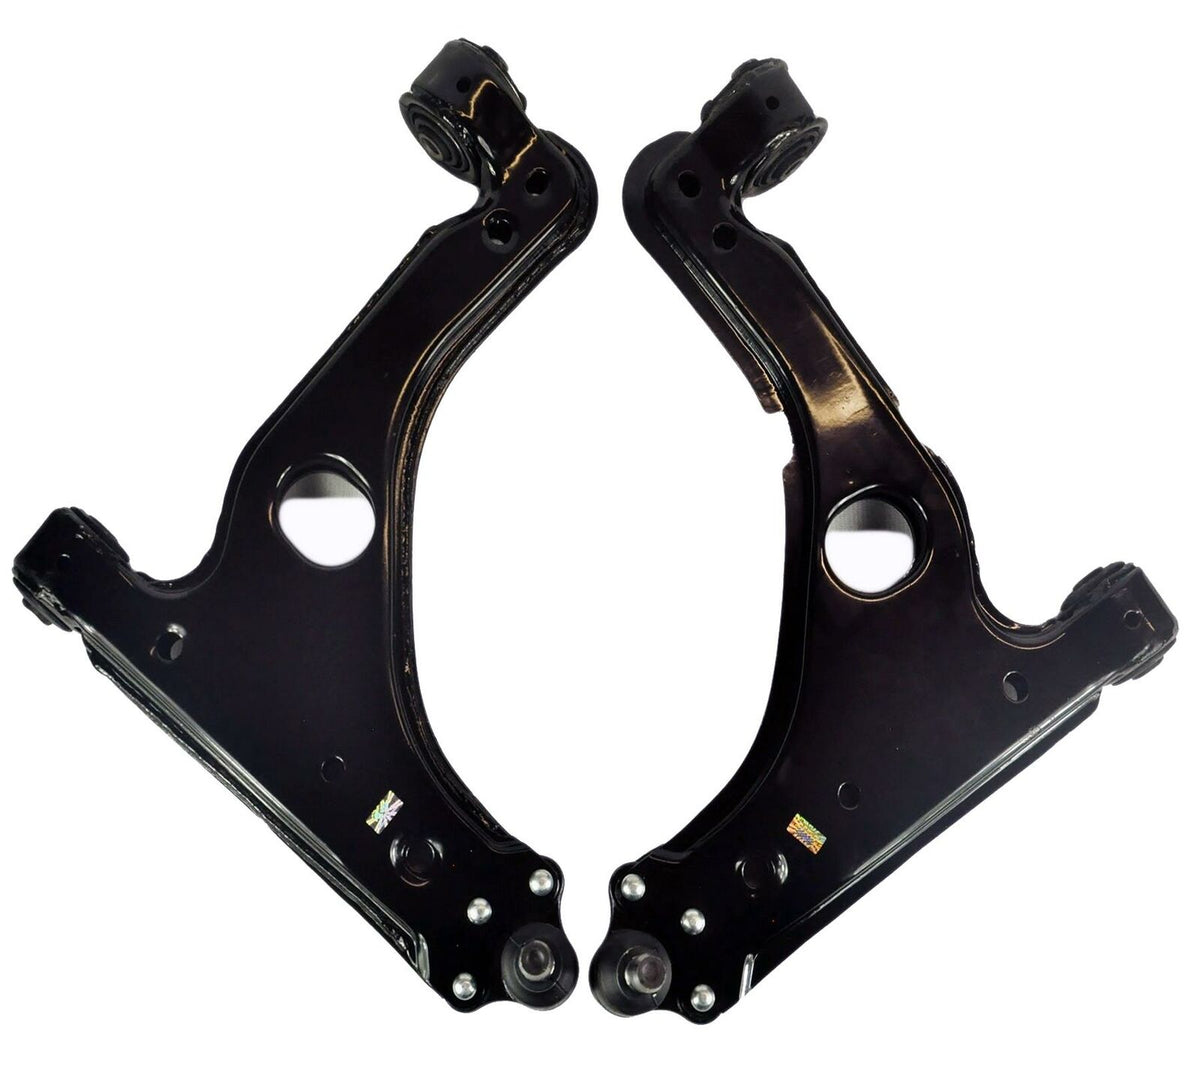 Pair Of Front Lower Wishbone Control Arms For Chevrolet Zafira F75 & Vauxhall Meriva, Signum, Astra, Zafira